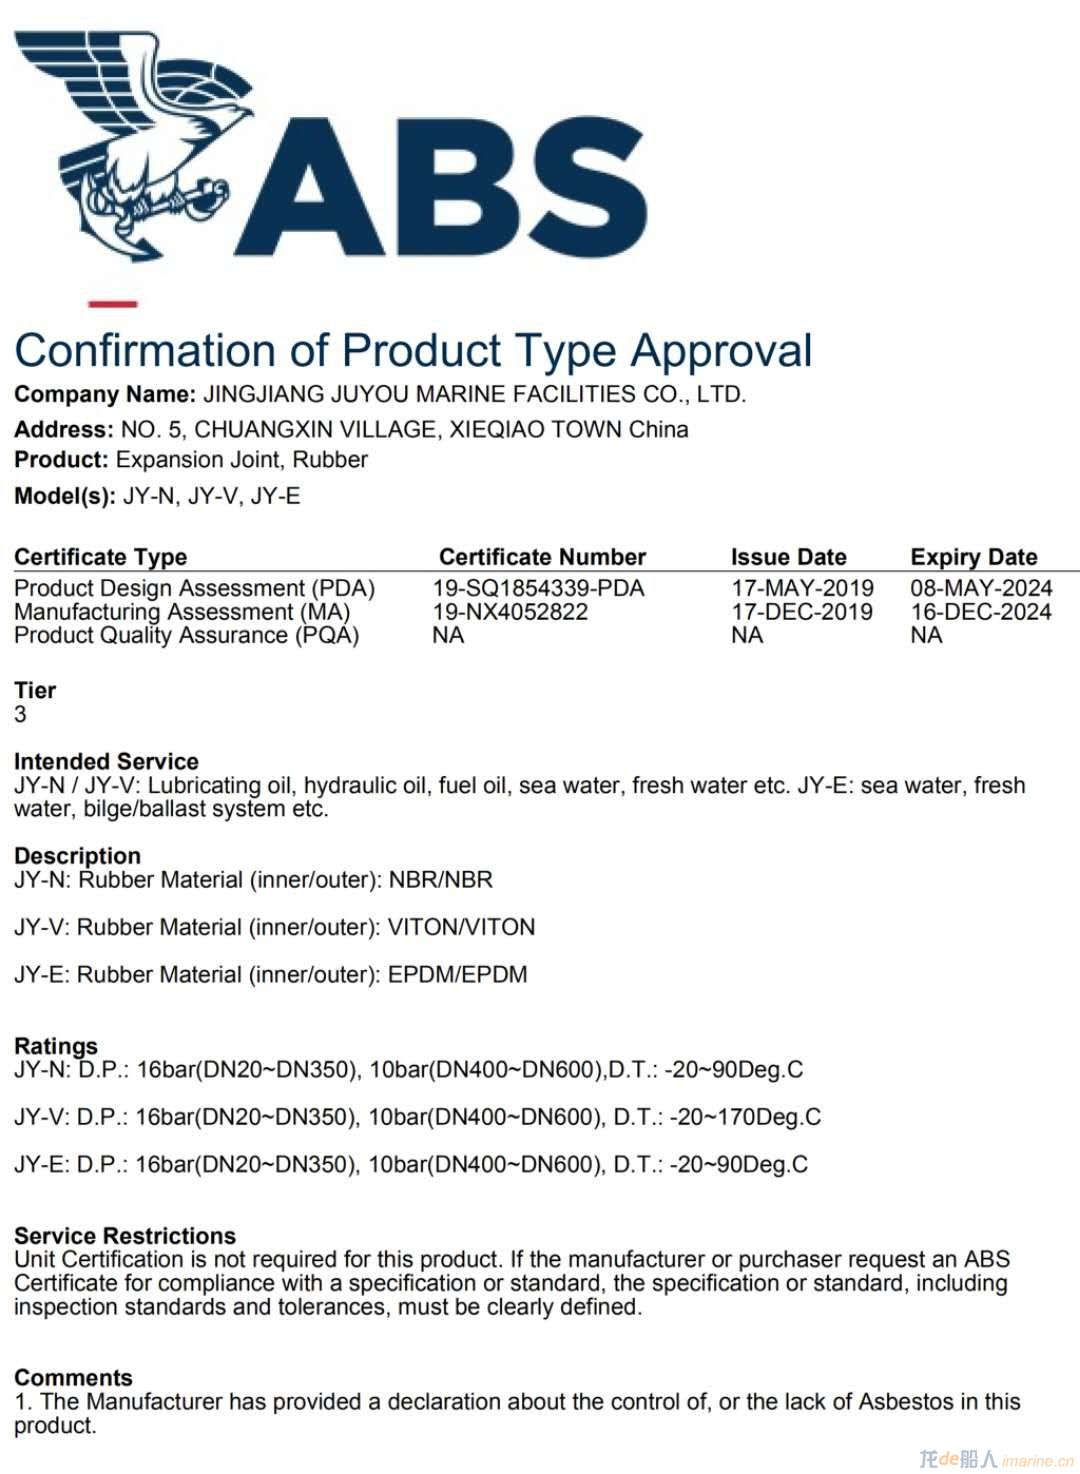 ABS TYPE APPROVAL CERTIFICATE 